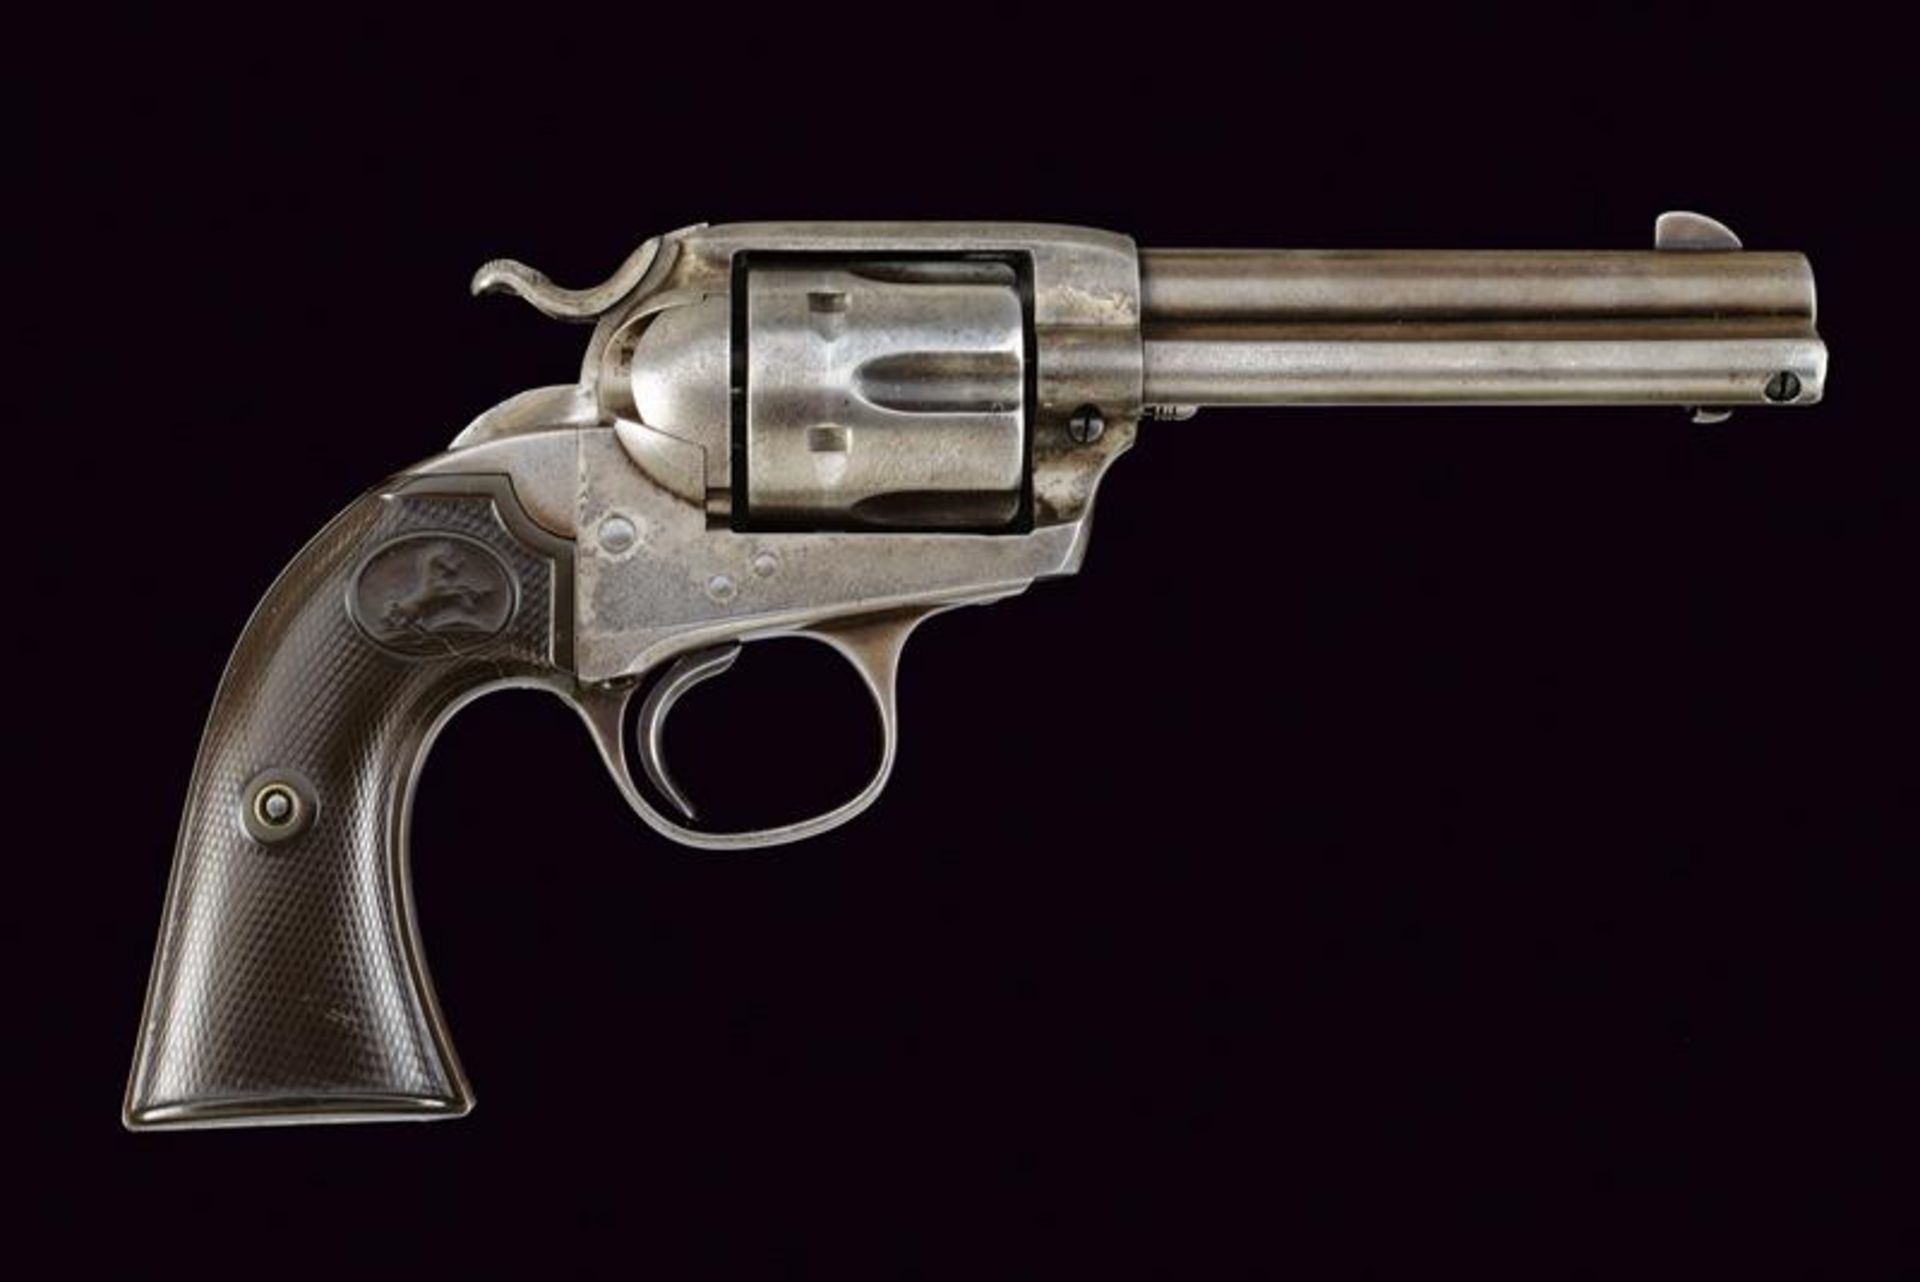 A Colt Single Action Revolver - Image 8 of 8